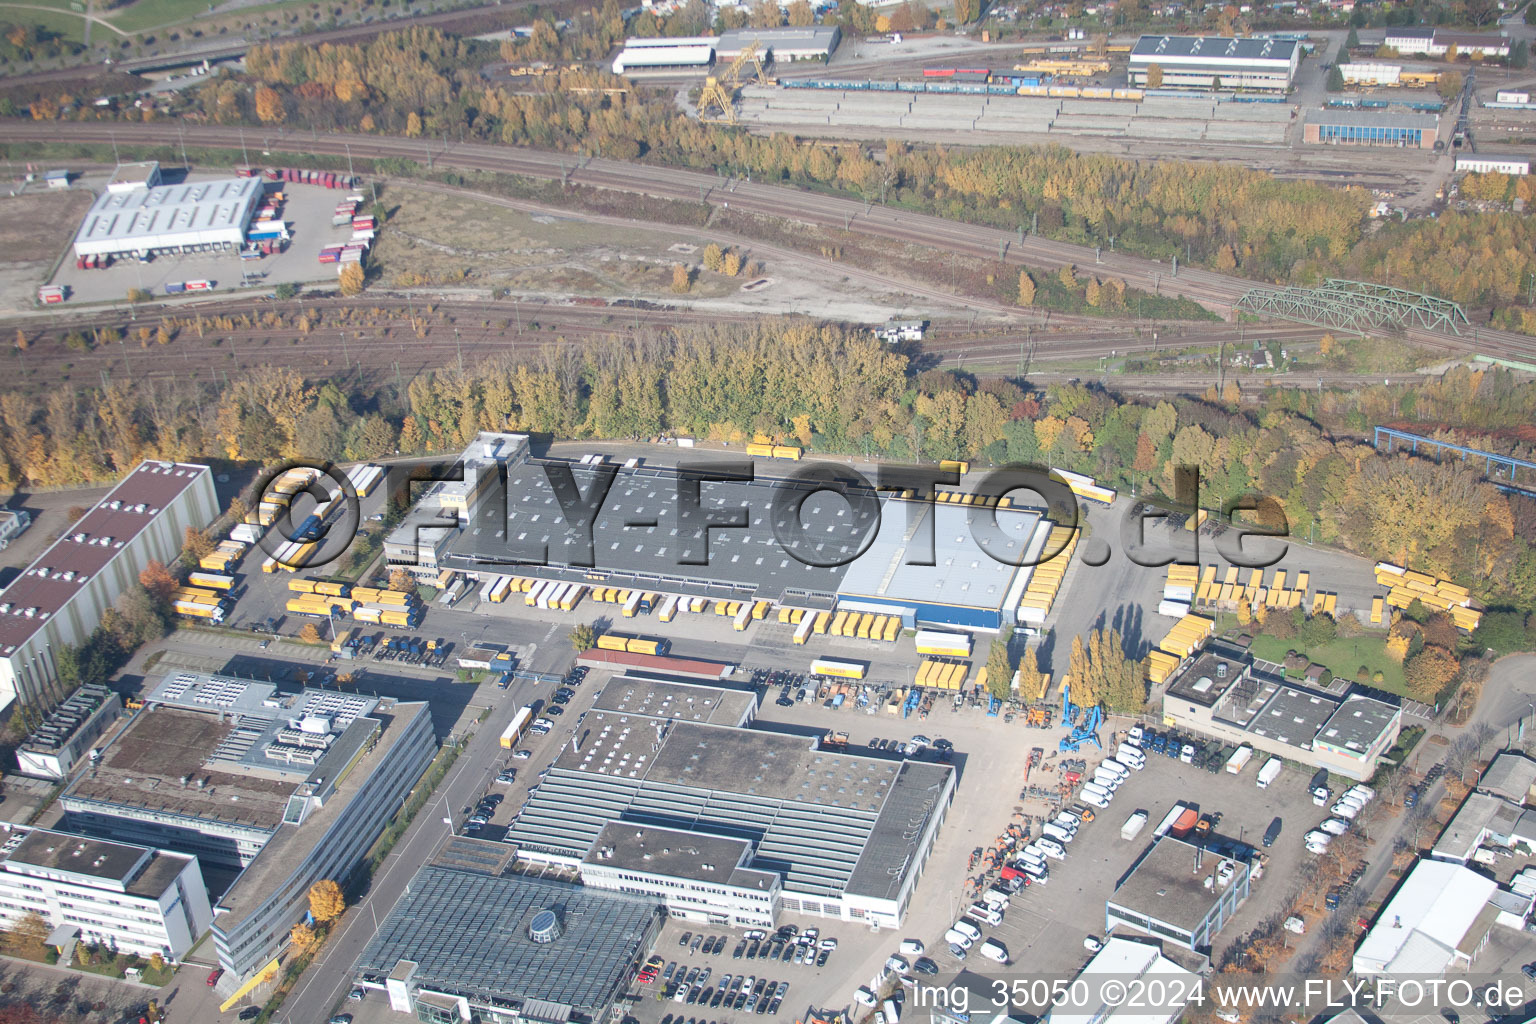 Bird's eye view of Warehouses and forwarding building SWS-Speditions-GmbH, Otto-street in the district Durlach in Karlsruhe in the state Baden-Wurttemberg